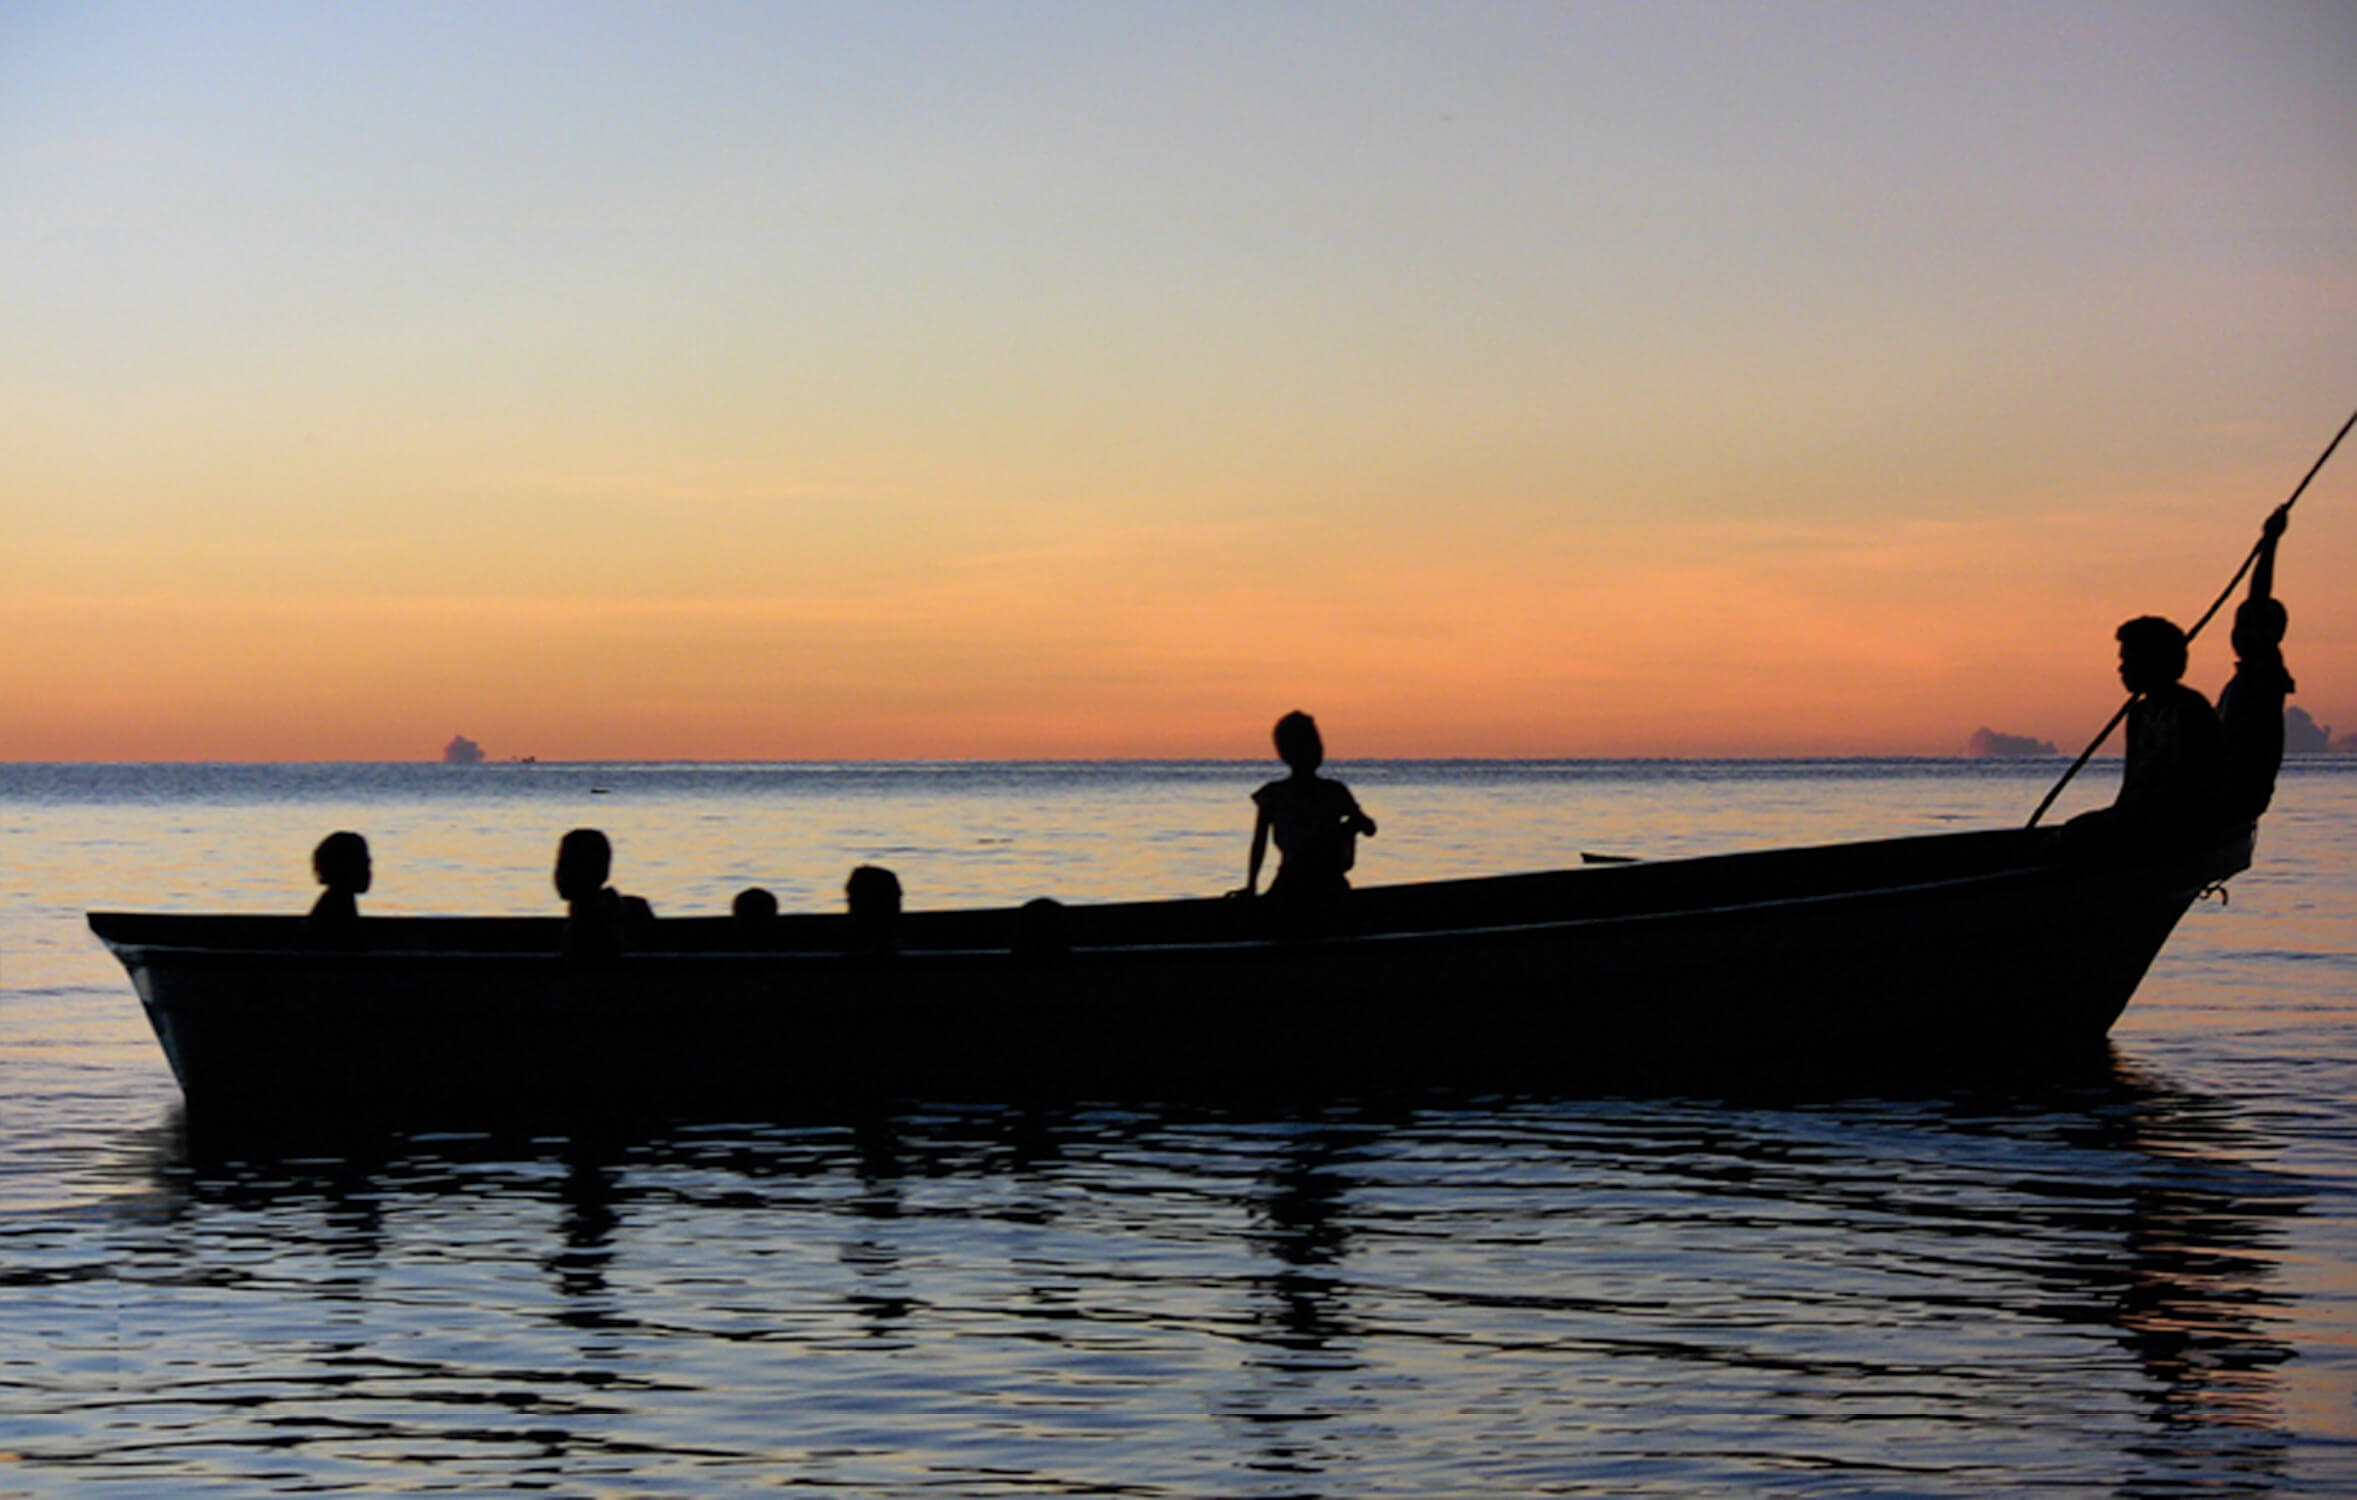 A photo of four children sitting in a boat on the water. It is sunset, the water is dark blue and the sky features a vibrant sunset of yellows, reds, and oranges. Only the silhouette of the children on the boat is visible.